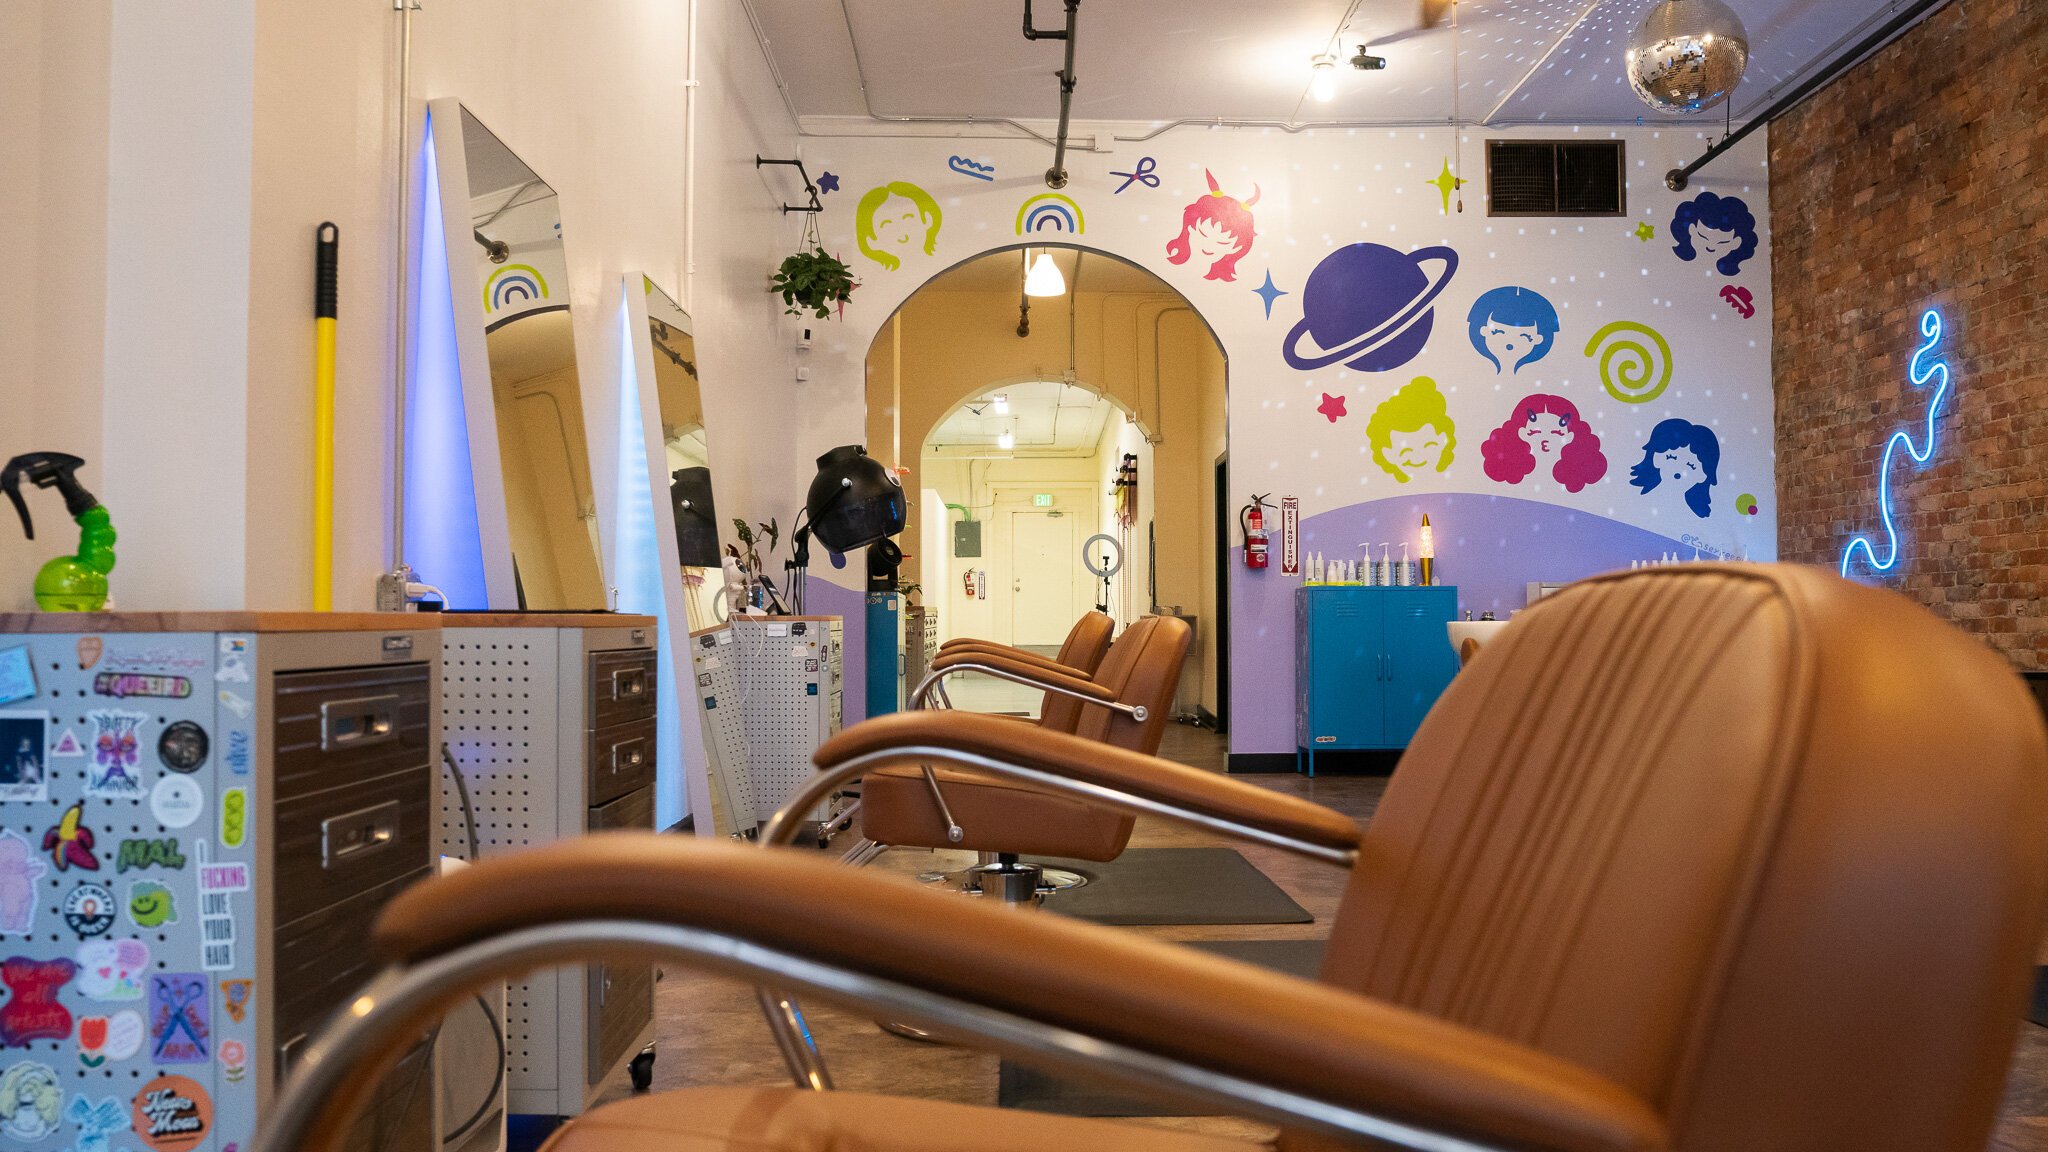 The Space Salon owner Olive refers to the salon's decor style as "space disco."